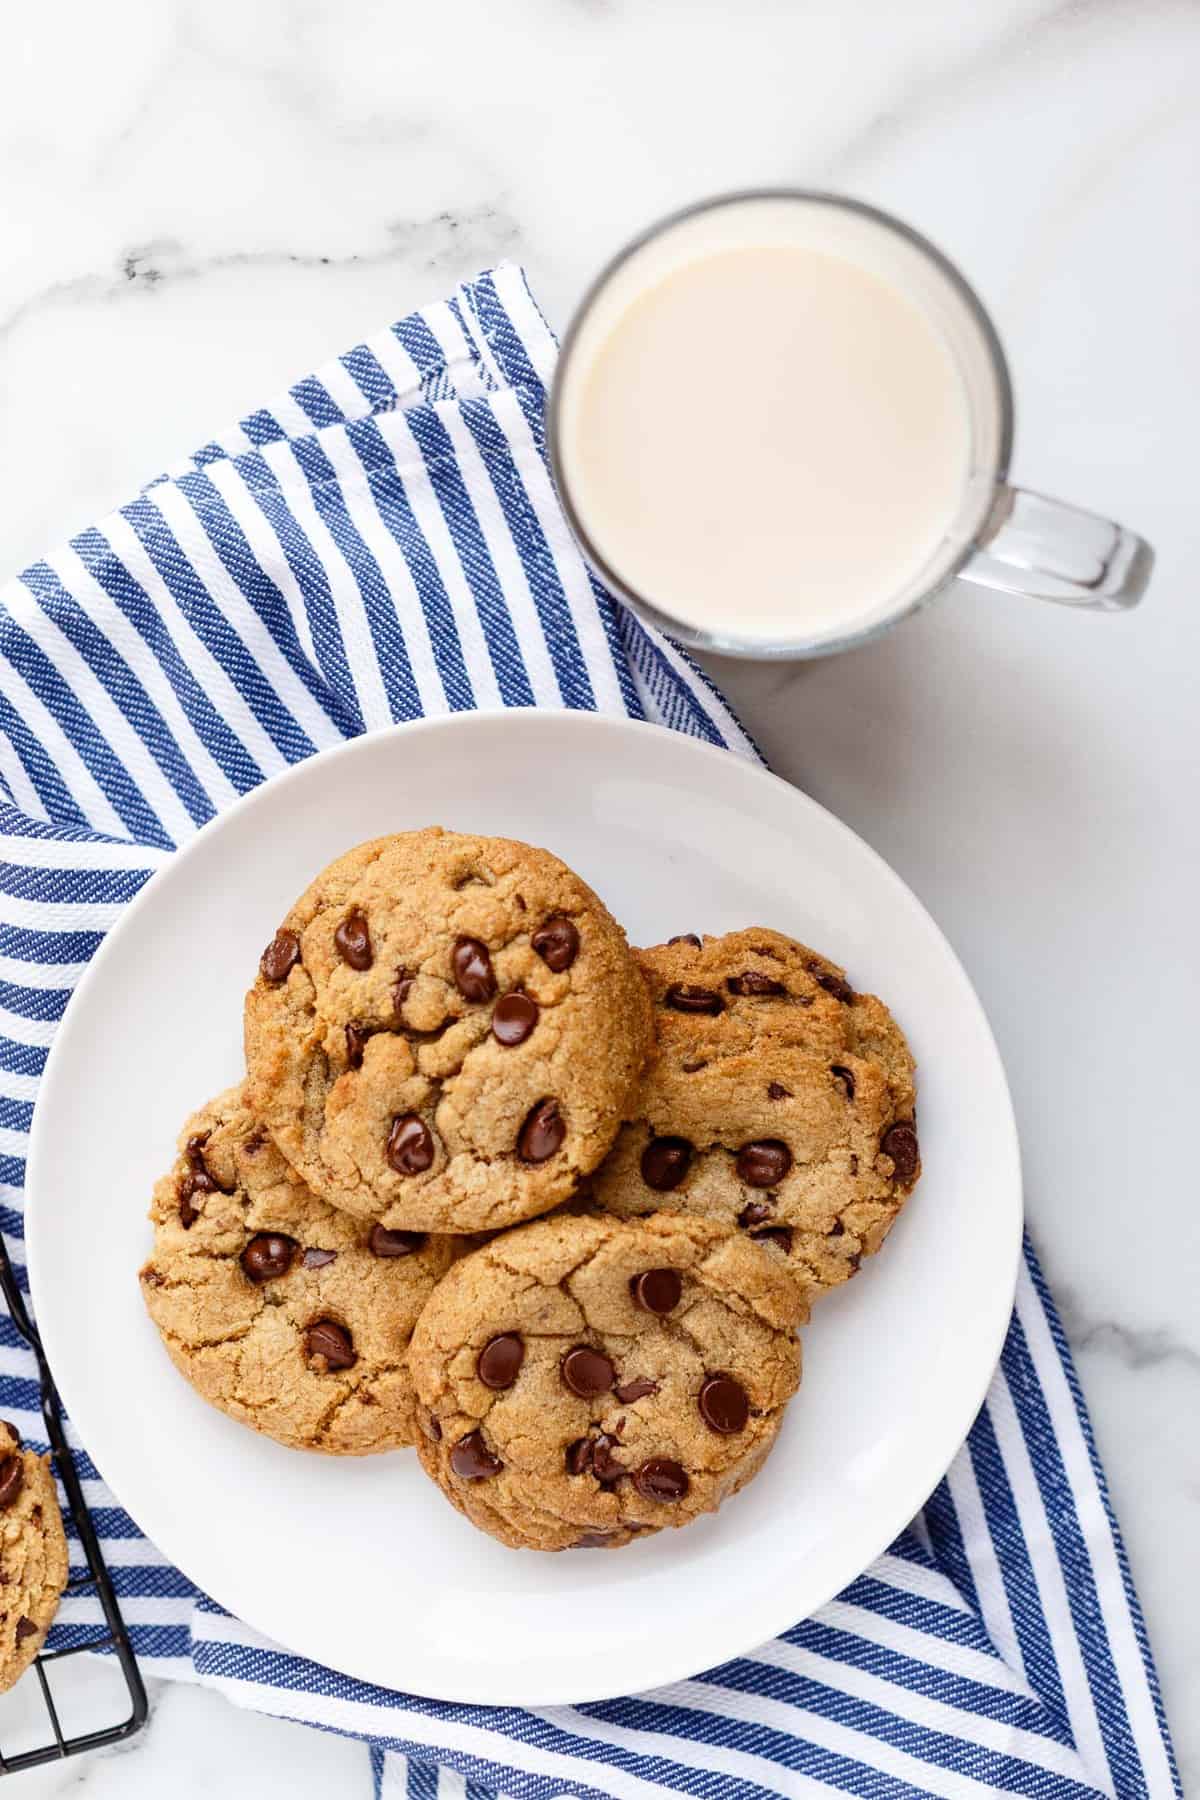 Close up of a plate of vegan chocolate chip cookies on a blue striped tea towel with a glass a non-dairy milk on a marble countertop.